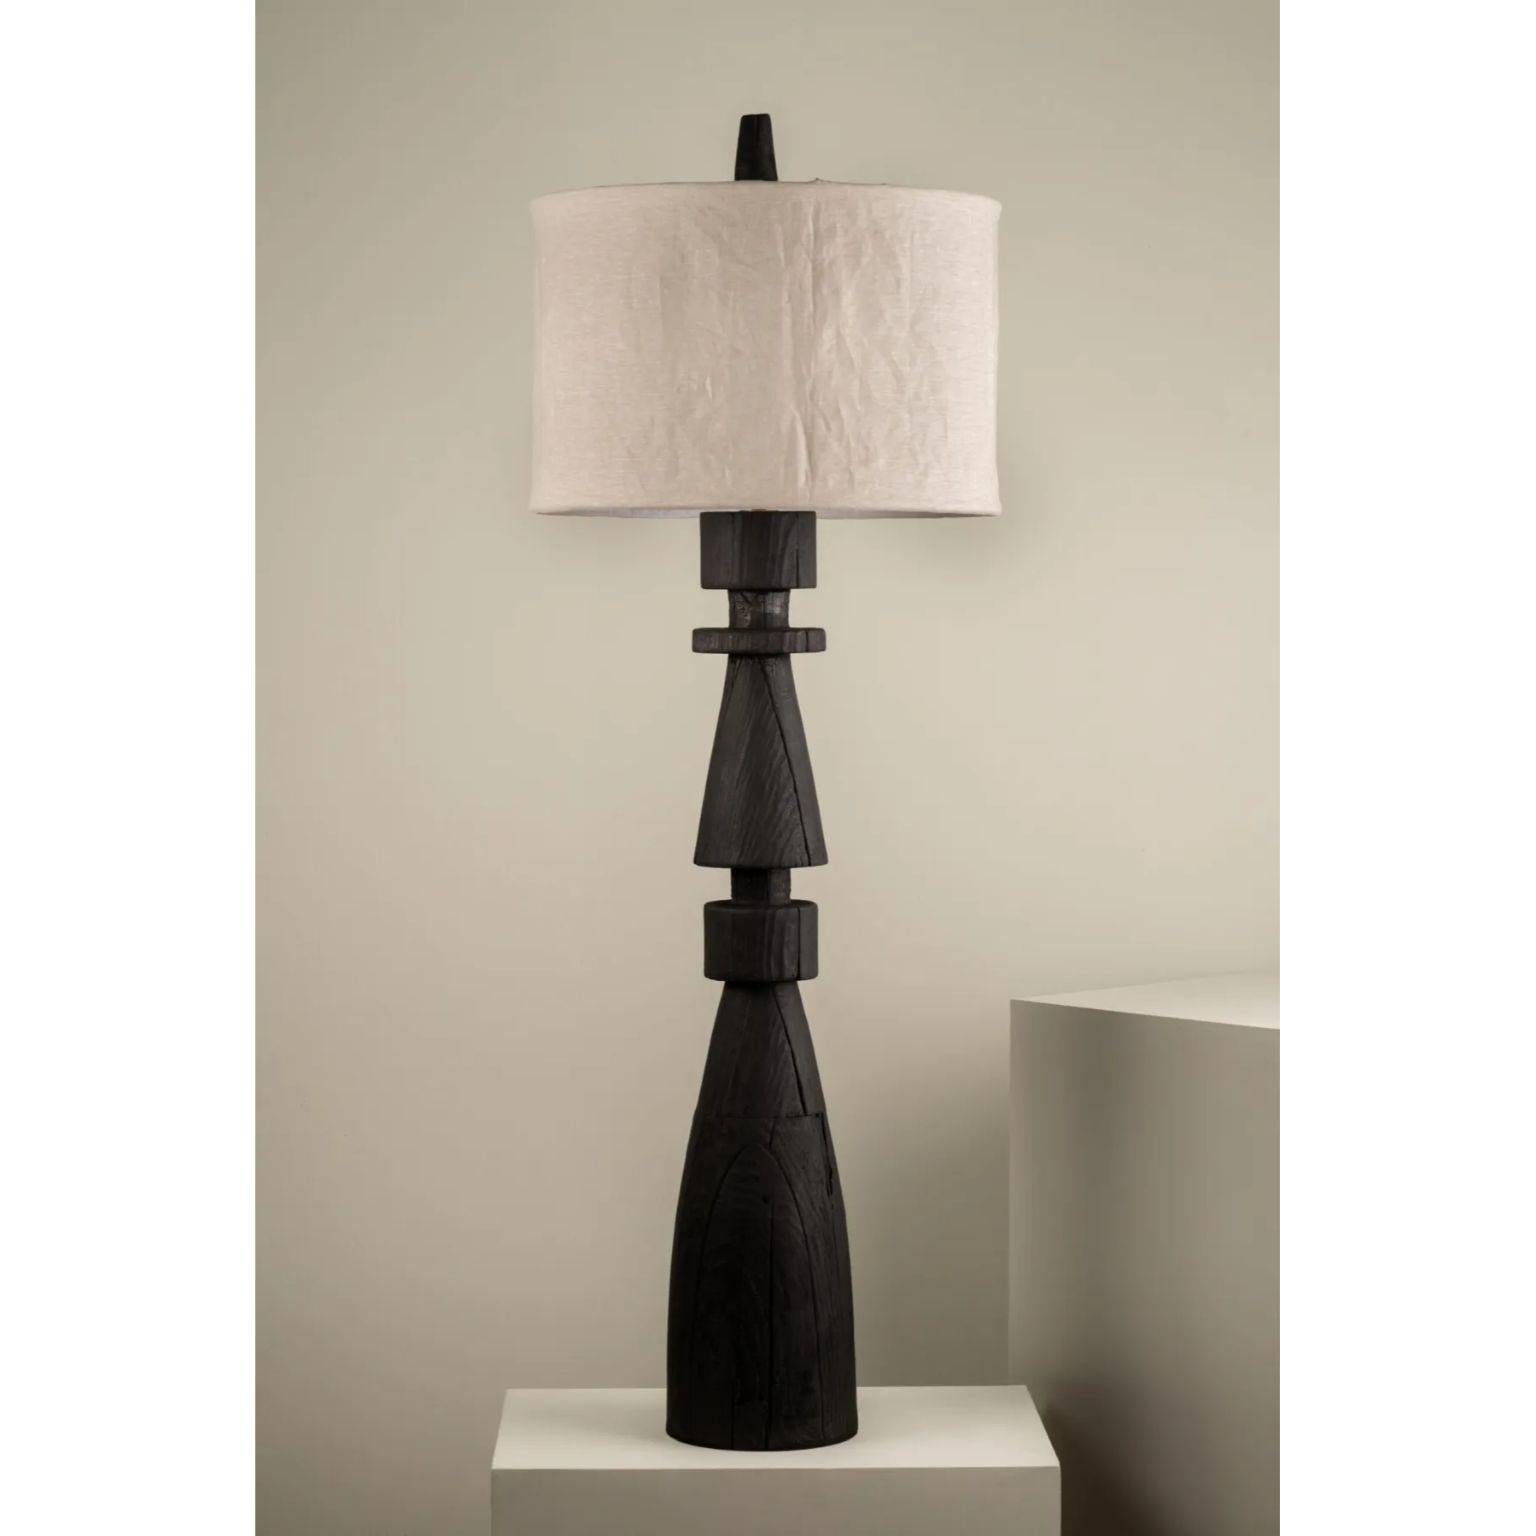 Mezquite Floor Lamp by Isabel Moncada
Dimensions: Ø 60 x H 181 cm.
Materials: Linen and pine wood.

Like a chess bishop, Mezquite makes its presence felt in a resounding manner. It has a sturdy wood base, its dark finish gives great character and